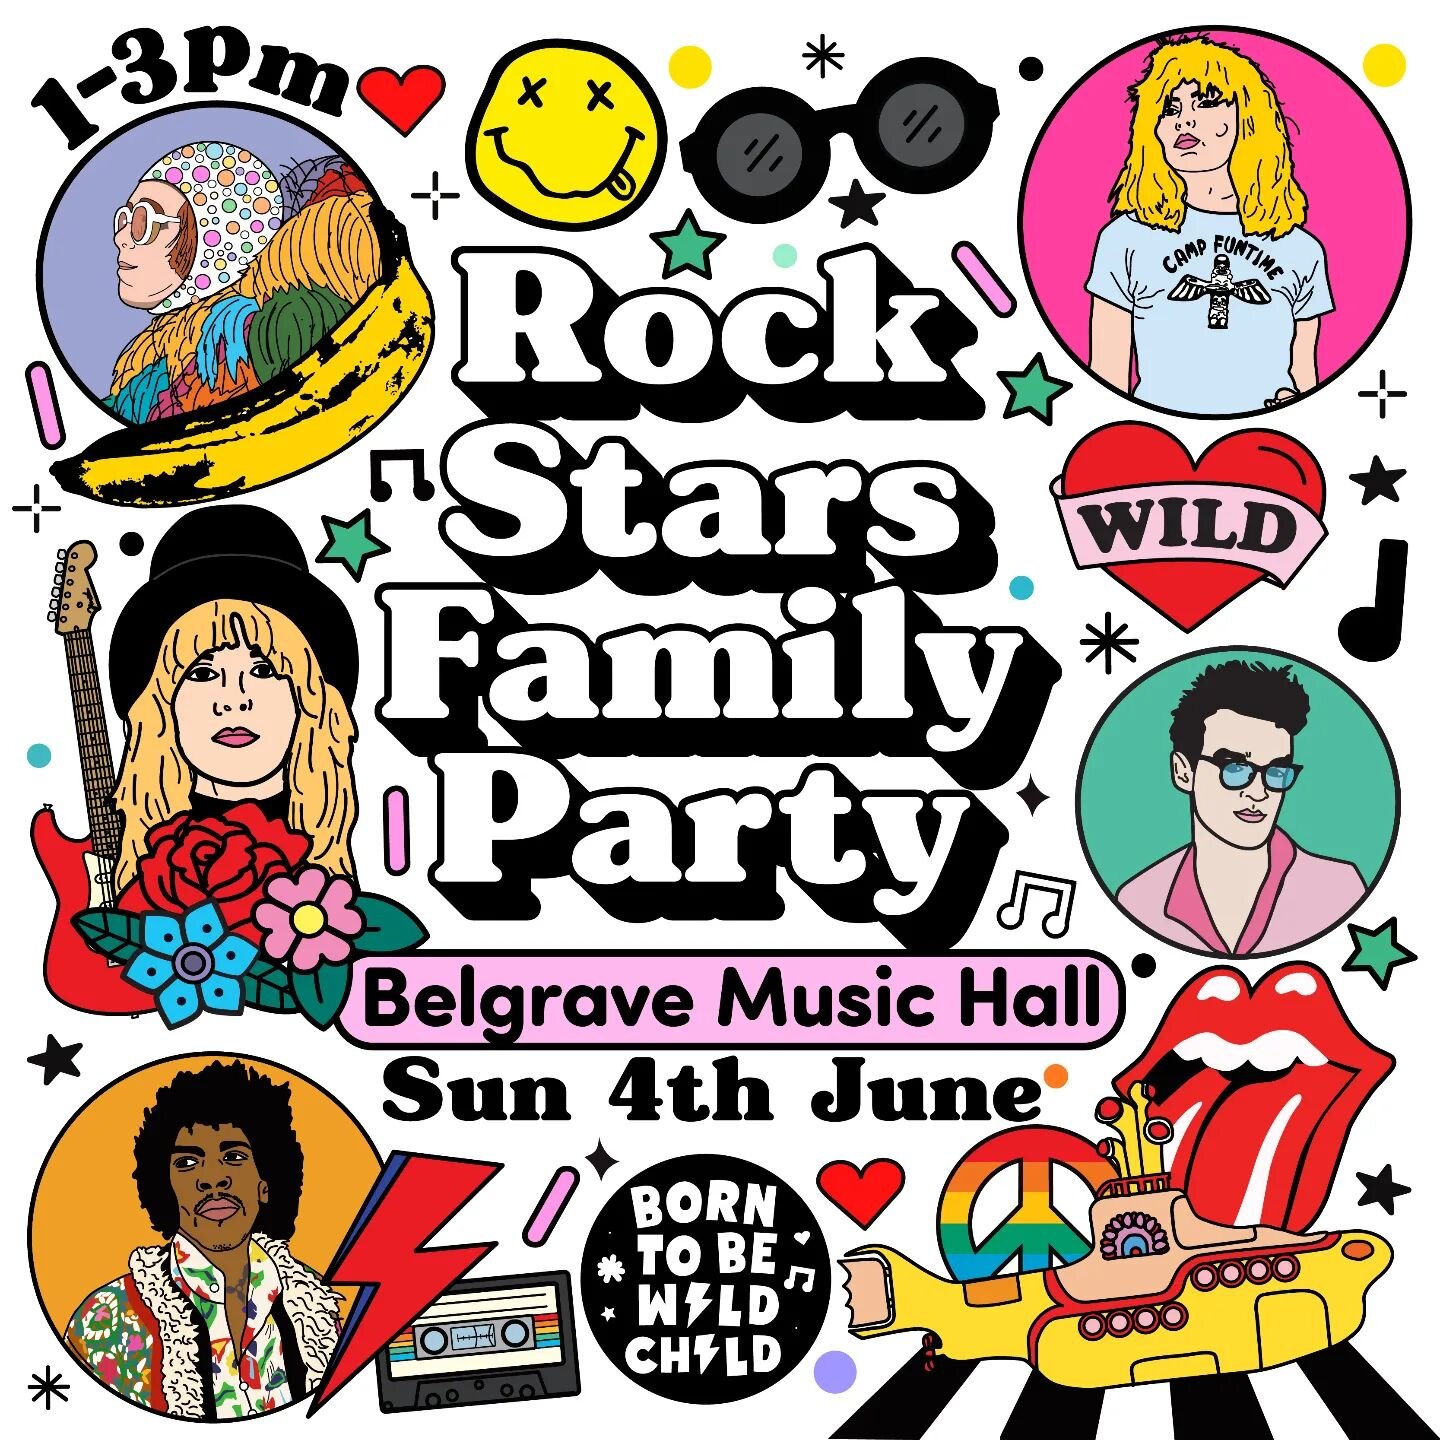 🎸⭐LEEDS 🎸⭐ TICKETS NOW ON SALE @skiddleuk

We are back at the brill @belgravemusichall Sunday 4th June for a family rockstars party! 🎸⭐

Bring the little rebel rebel&rsquo;s for a day of dancing and rocking out! Here&rsquo;s what we have in store&